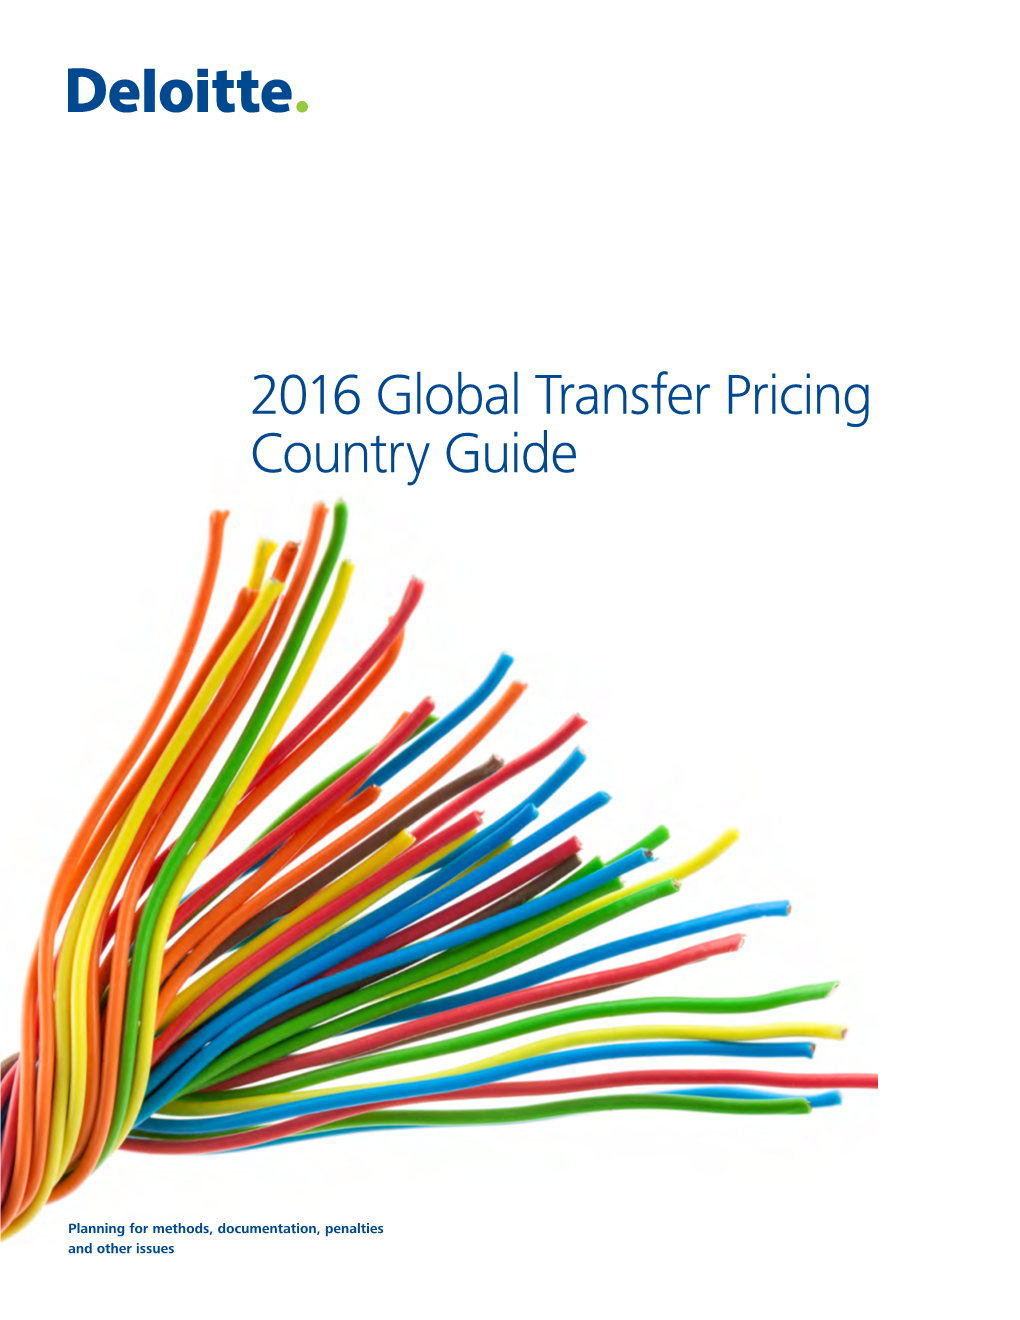 Download the PDF 2016 Global Transfer Pricing Country Guide